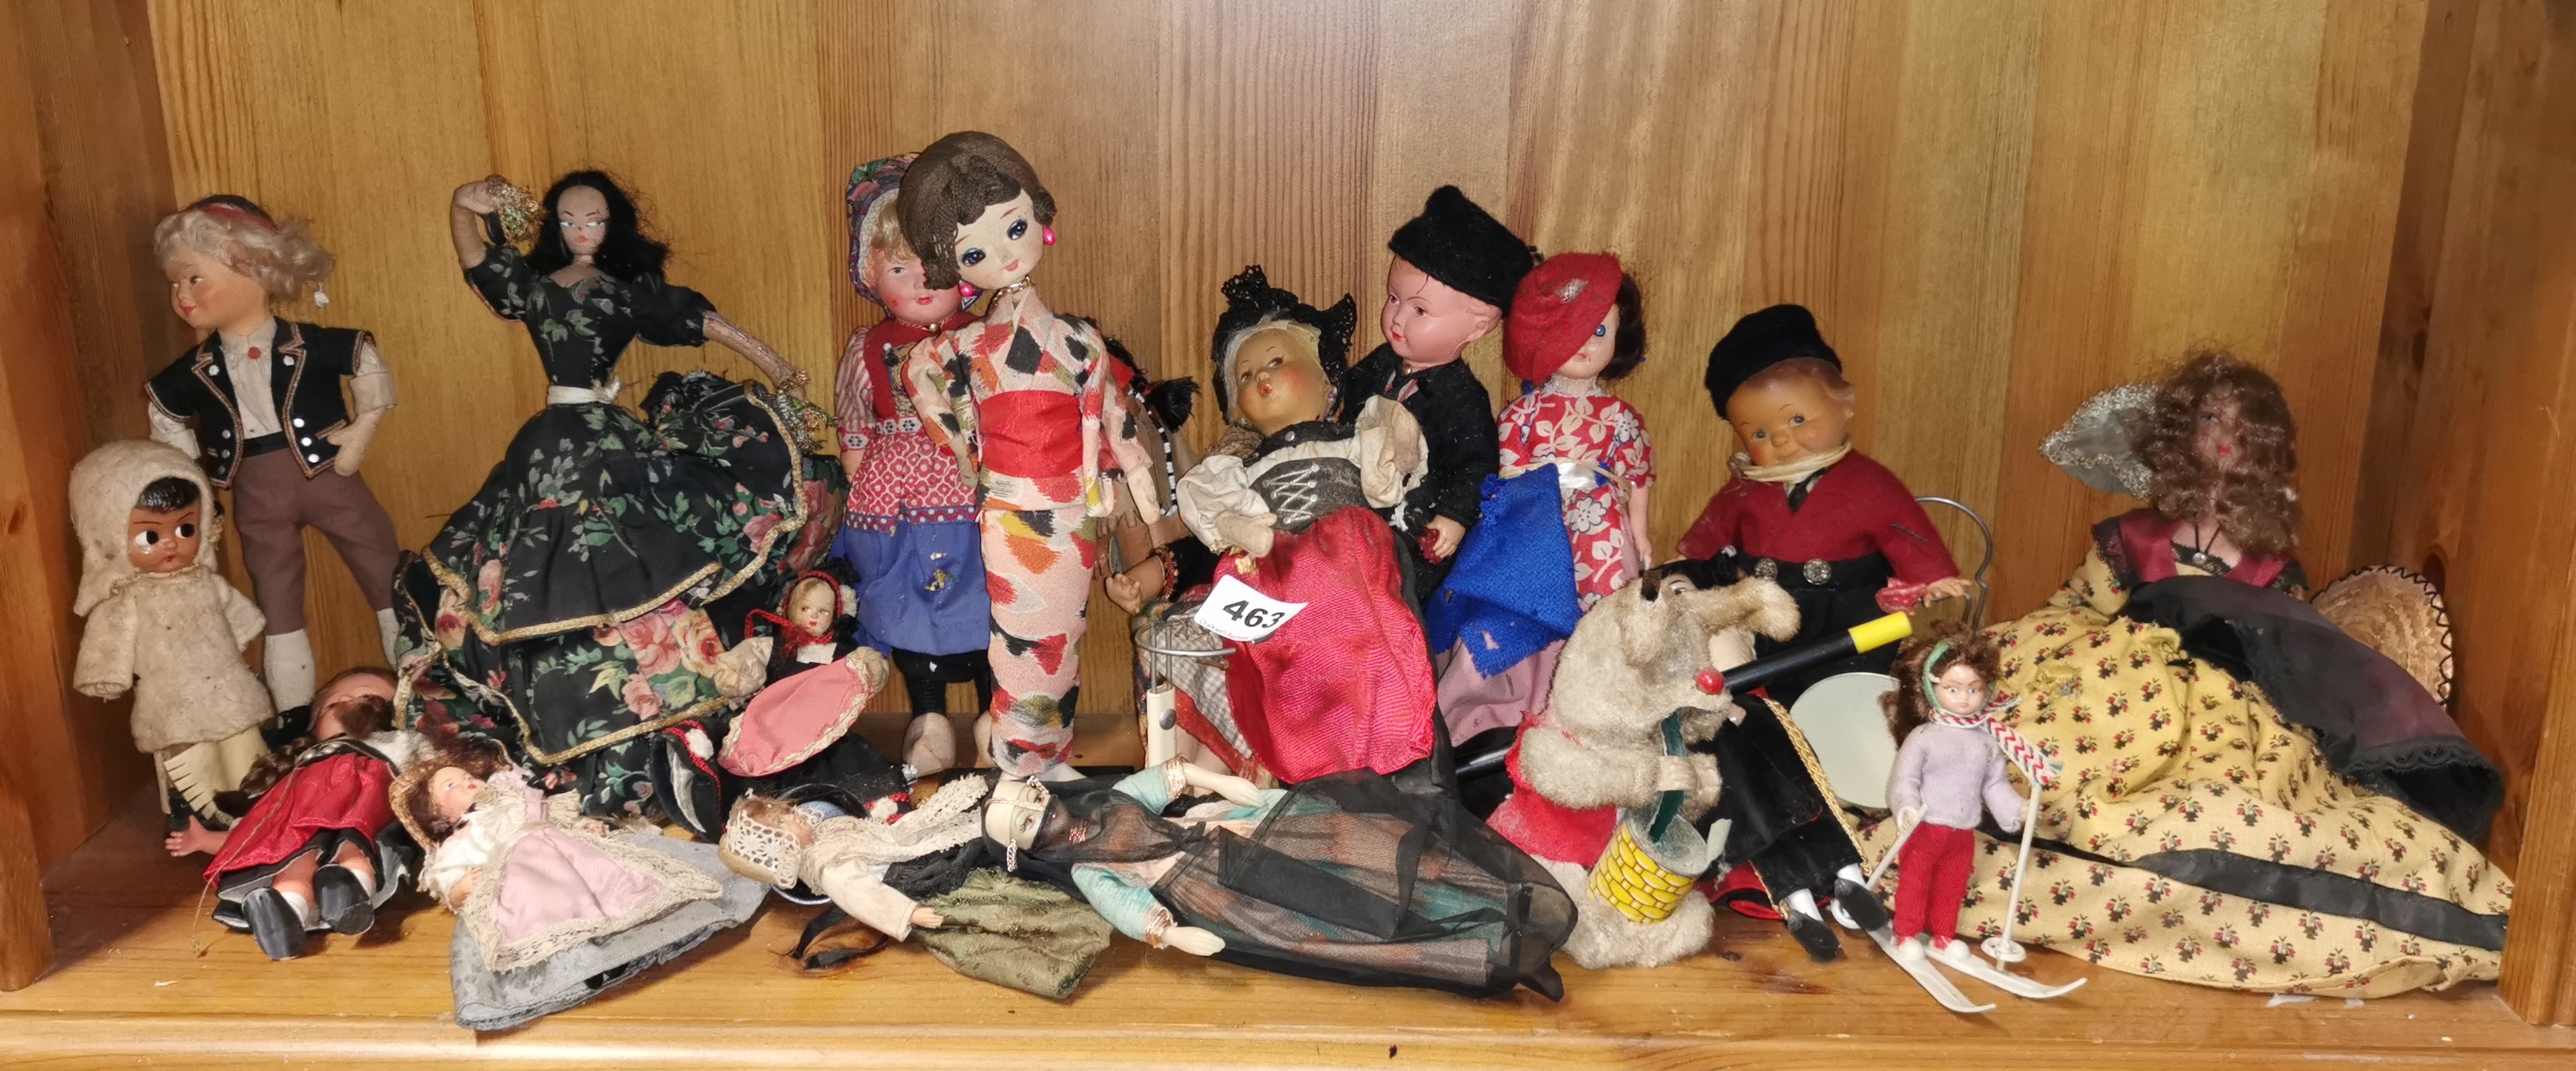 A collection of vintage dolls and toys.